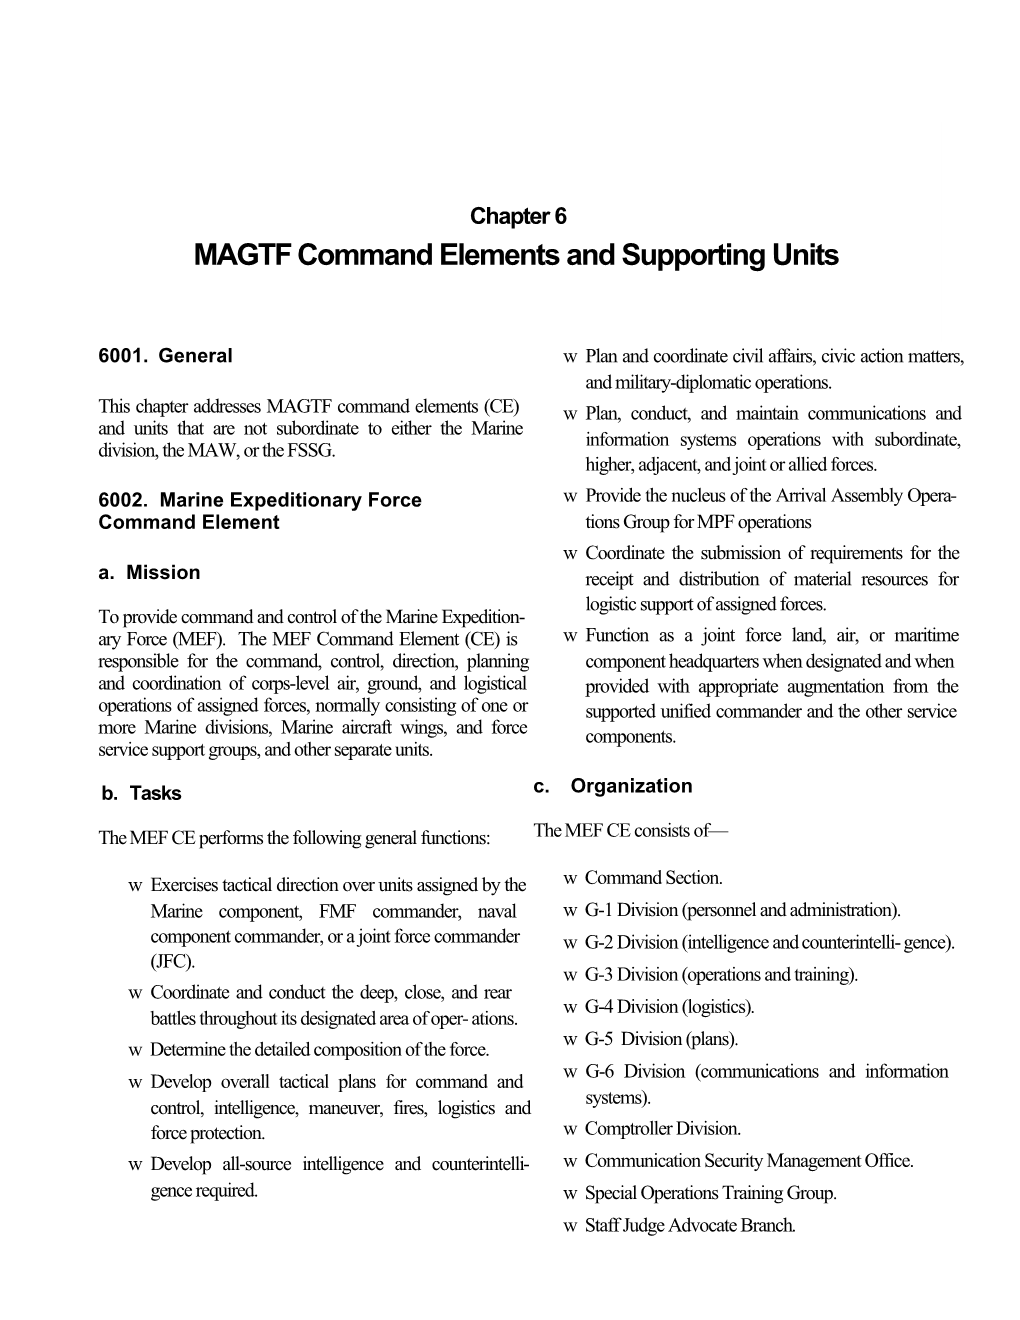 MAGTF Command Elements and Supporting Units